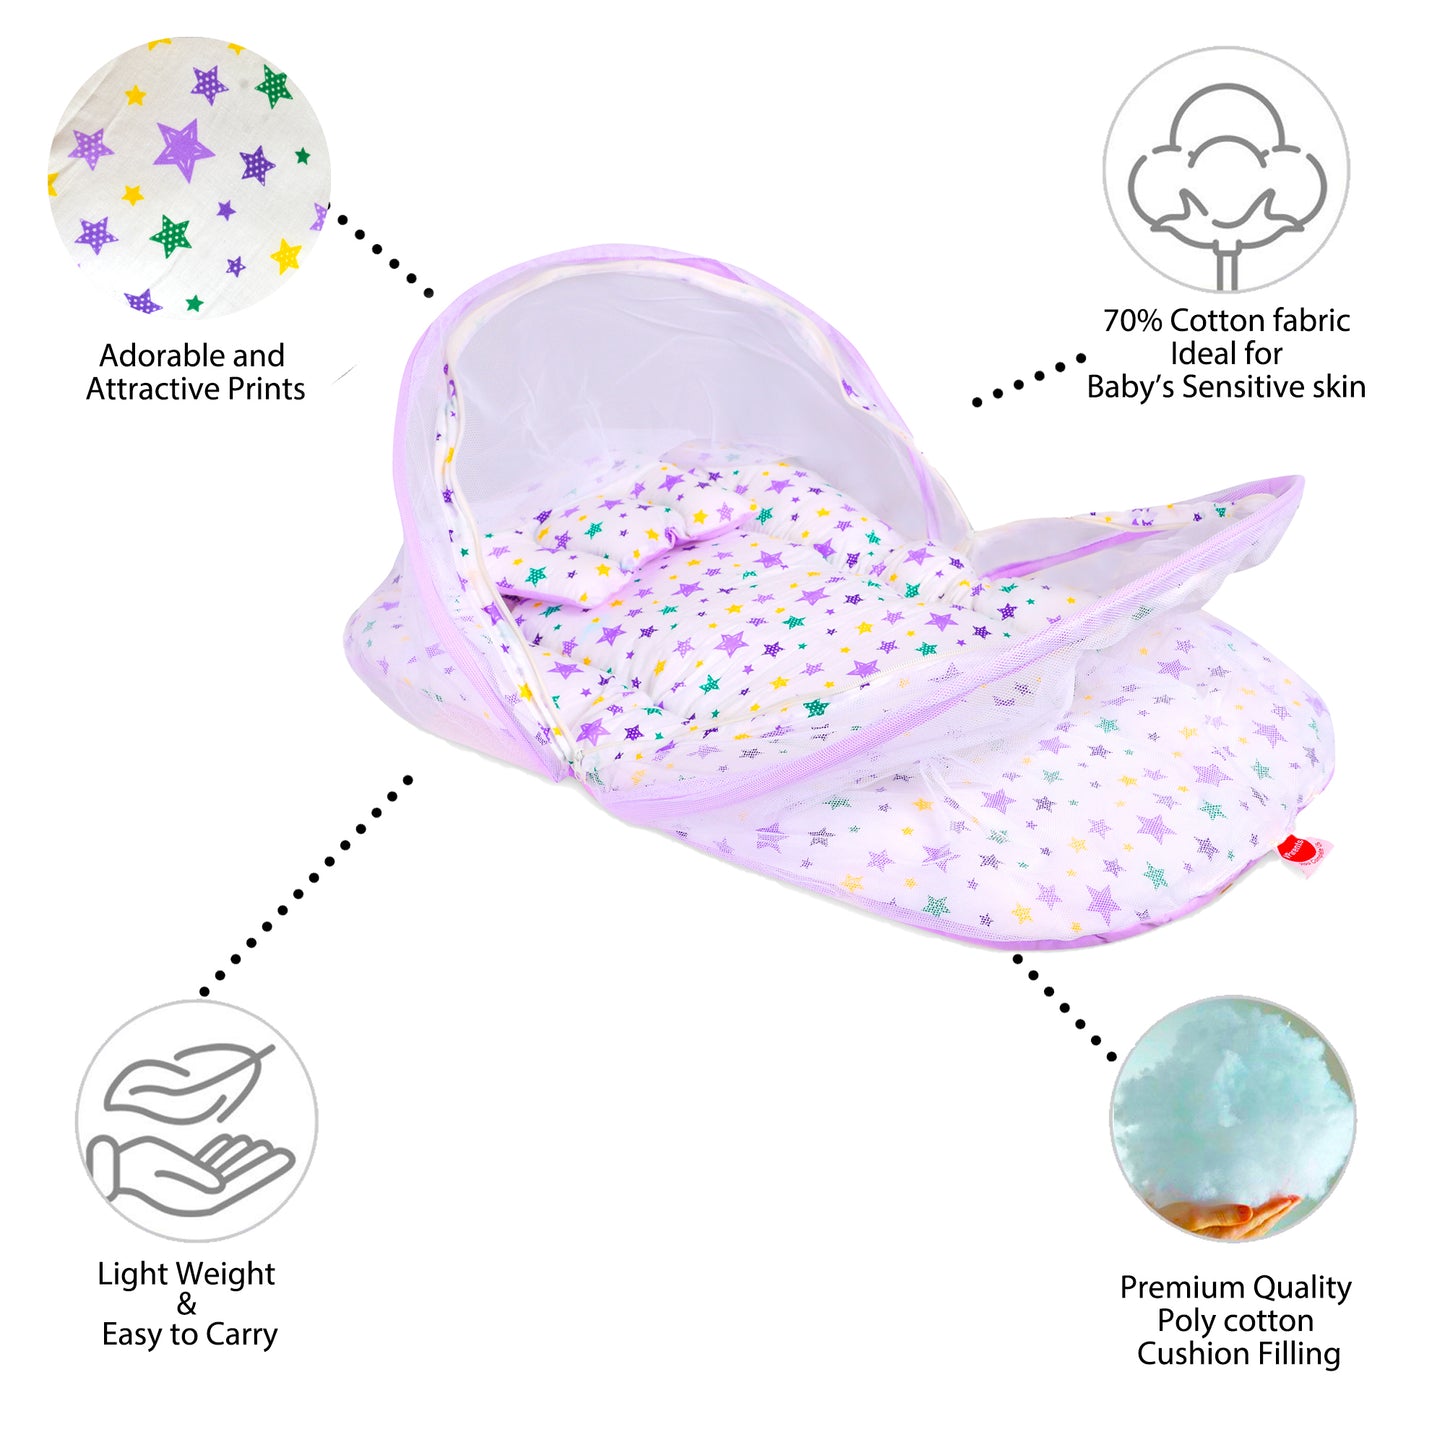 VParents Joy Baby Bed with Mosquito Net with Zip Closure & Neck Pillow, Baby Bedding for New Born